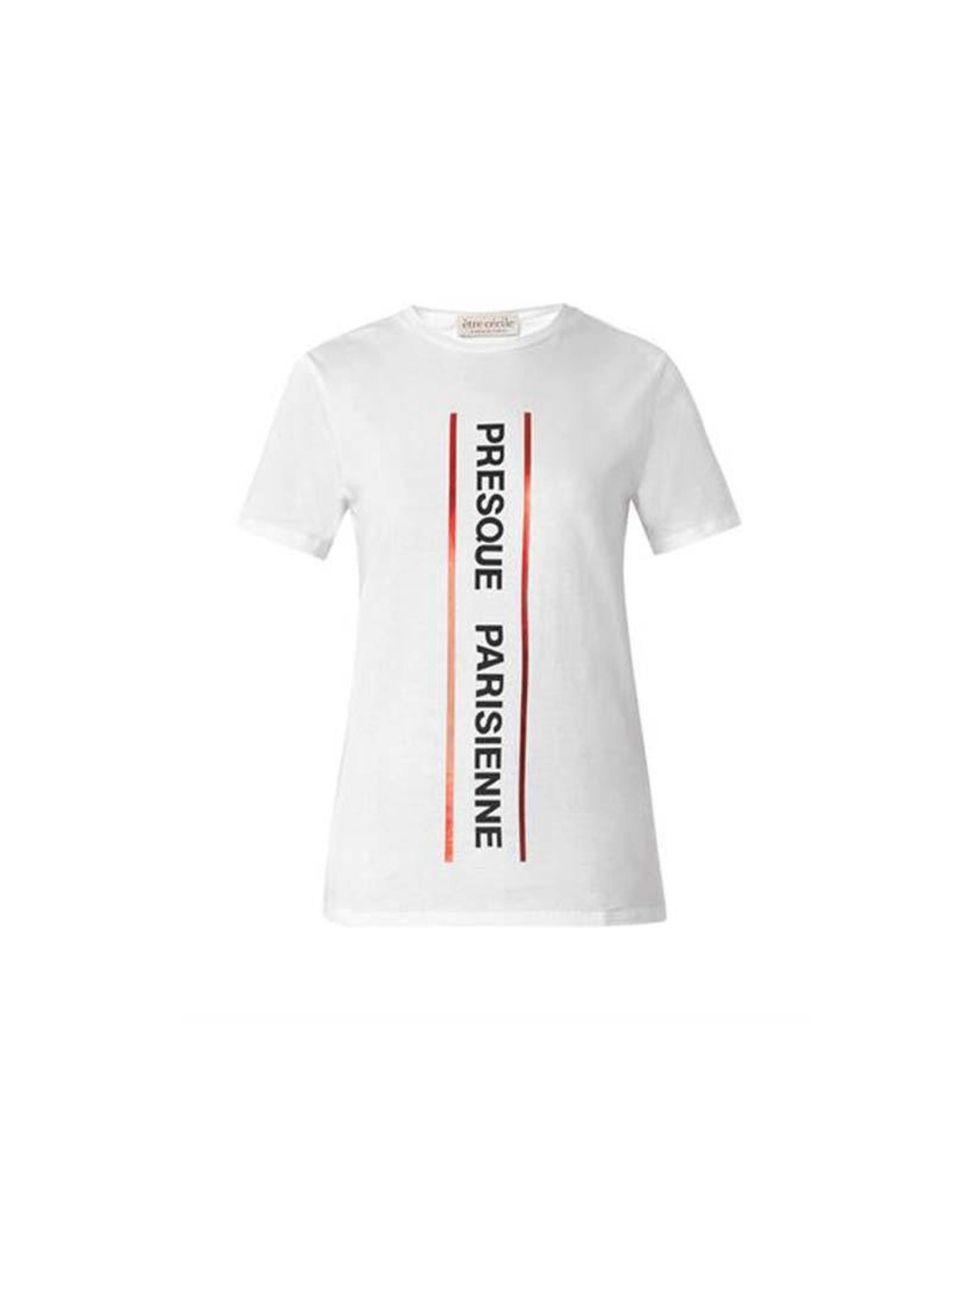 <p>A graphic Tee is an easy layering piece</p>

<p>Etre Cécile, £75 available at <a href="http://www.matchesfashion.com/product/199045">Matches </a></p>